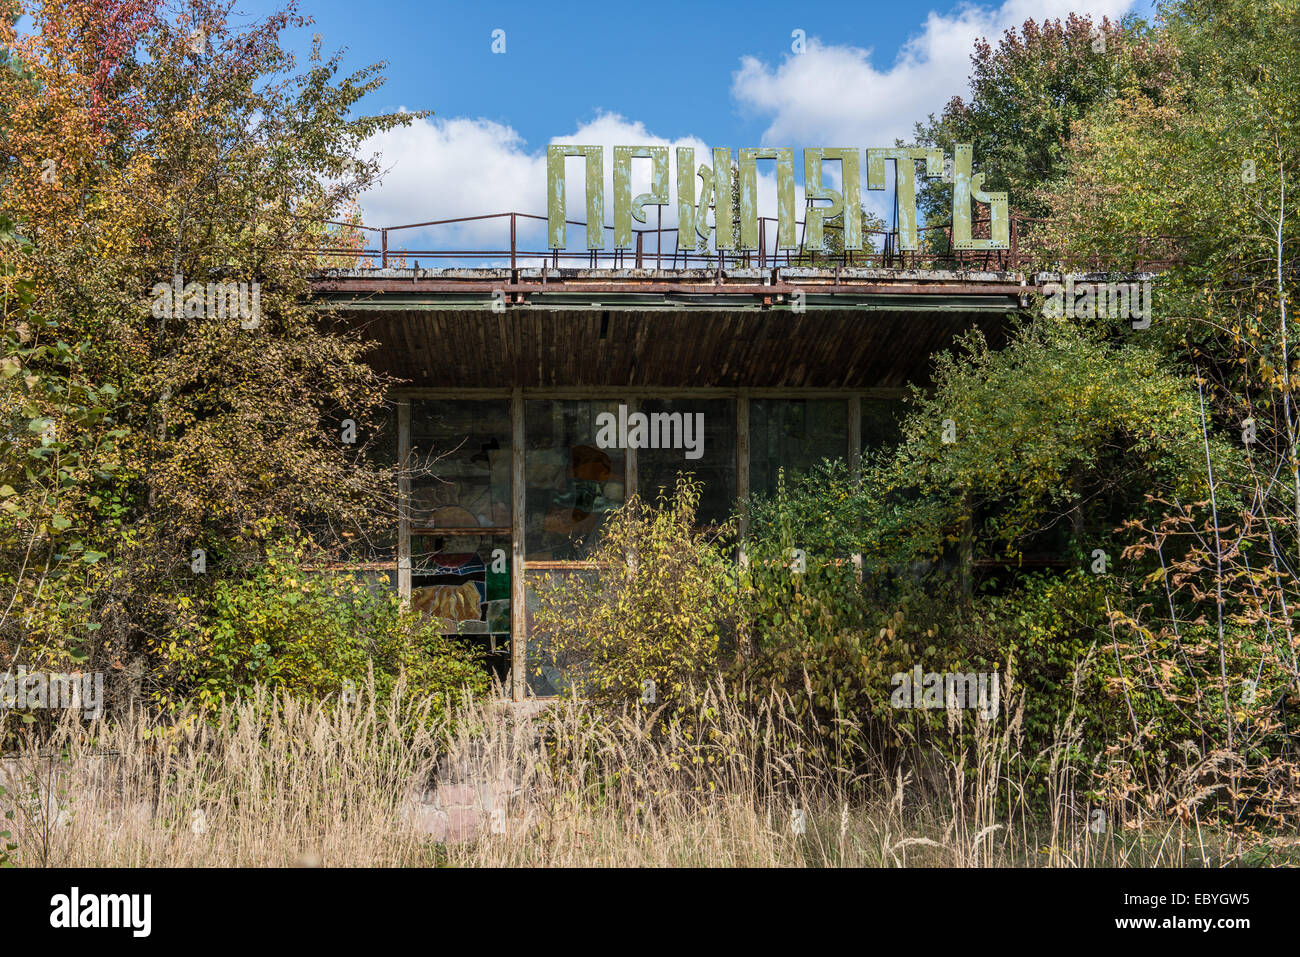 Drone RUIN - Page 12 Famous-cafe-pripyat-in-pripyat-abandoned-city-chernobyl-exclusion-EBYGW5